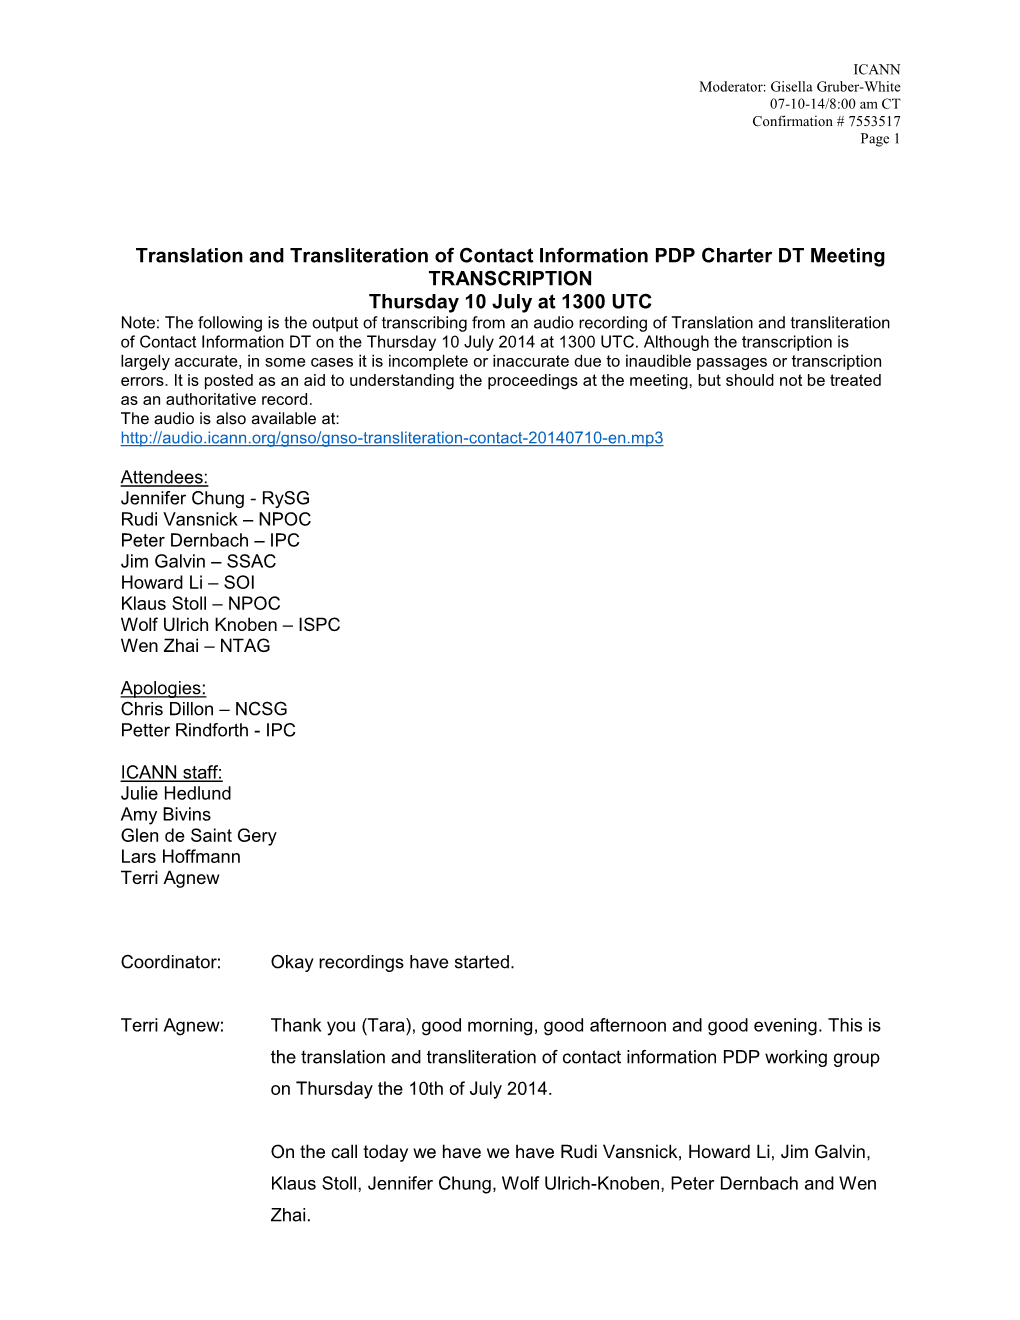 Translation and Transliteration of Contact Information PDP Charter